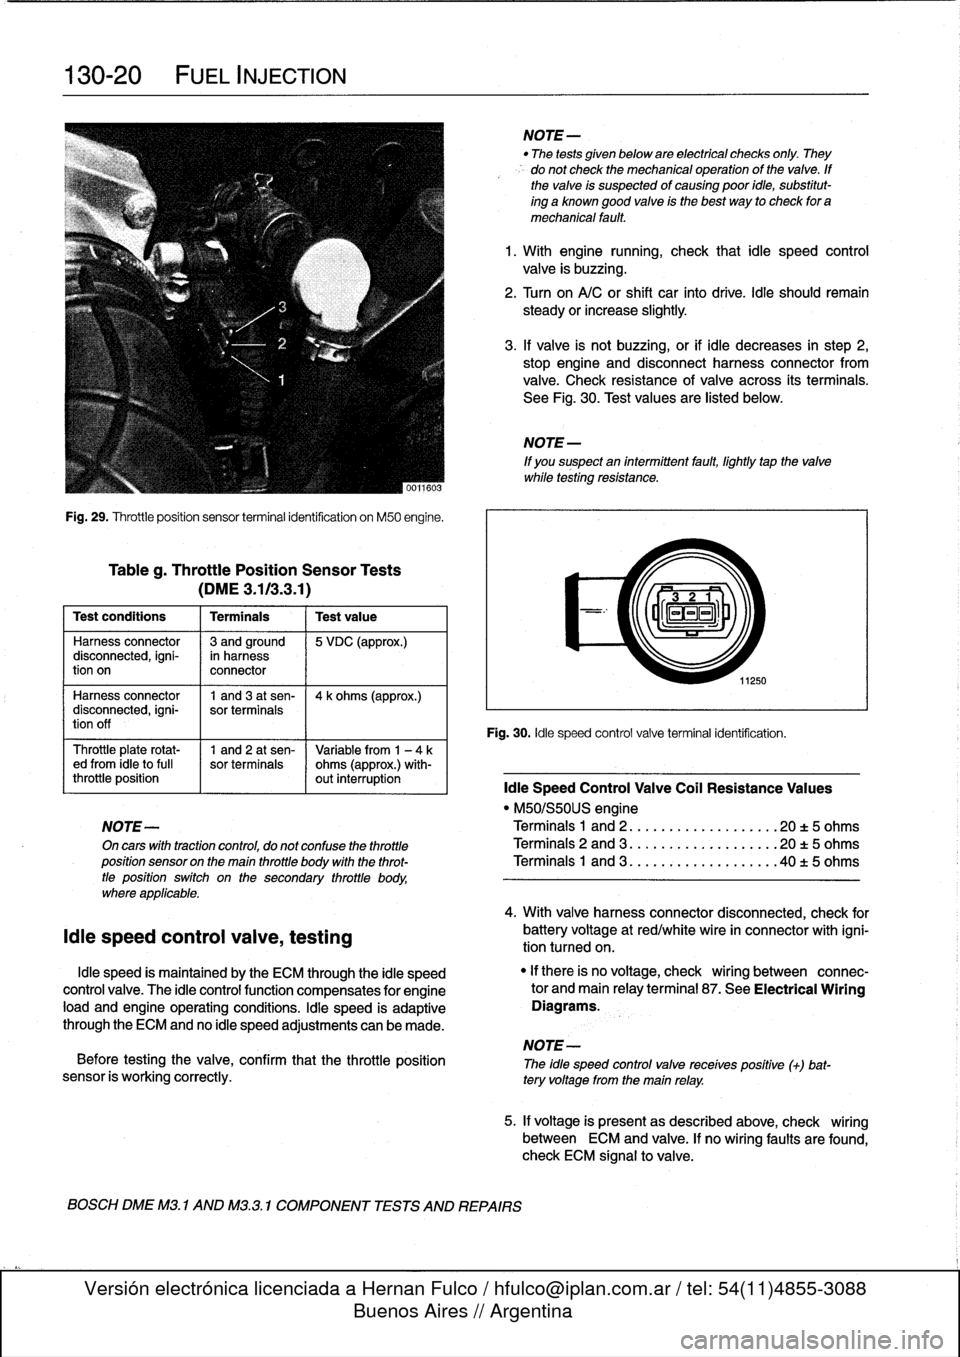 BMW M3 1996 E36 Workshop Manual 
130-20

	

FUEL
INJECTION

Fig
.
29
.
Throttleposition
sensor
terminal
identification
on
M50
engine
.

Tableg
.
Throttle
Position
Sensor
Tests

(DME3
.113
.3
.1)

Test
conditions

	

I
Terminals

	

